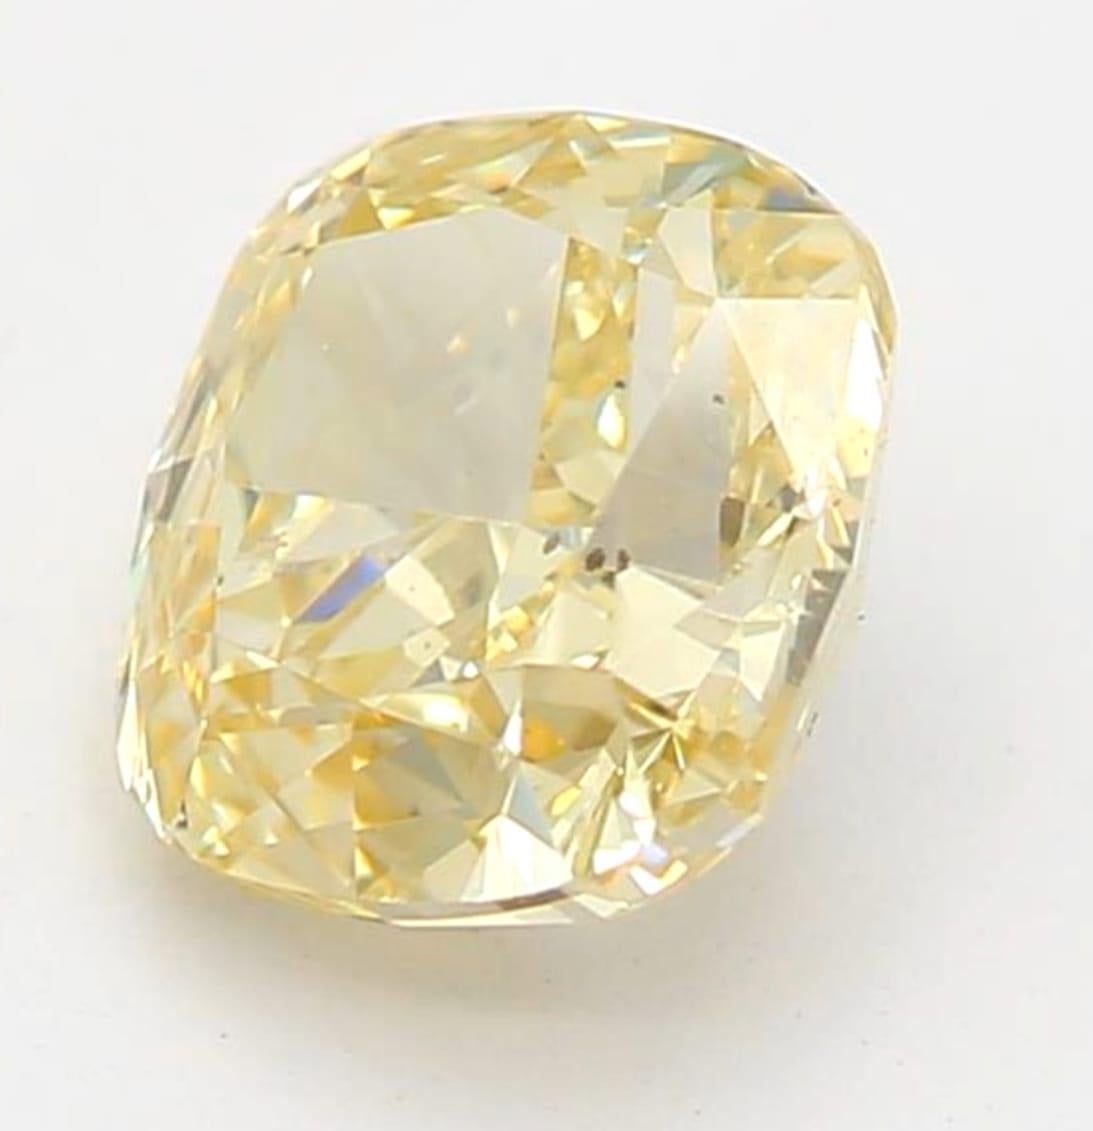 *100% NATURAL FANCY COLOUR DIAMOND*

✪ Diamond Details ✪

➛ Shape: Cushion
➛ Colour Grade: Fancy Light Brownish Yellow
➛ Carat: 0.72
➛ Clarity: SI1
➛ GIA Certified 

^FEATURES OF THE DIAMOND^

This light brownish-yellow diamond, often referred to as